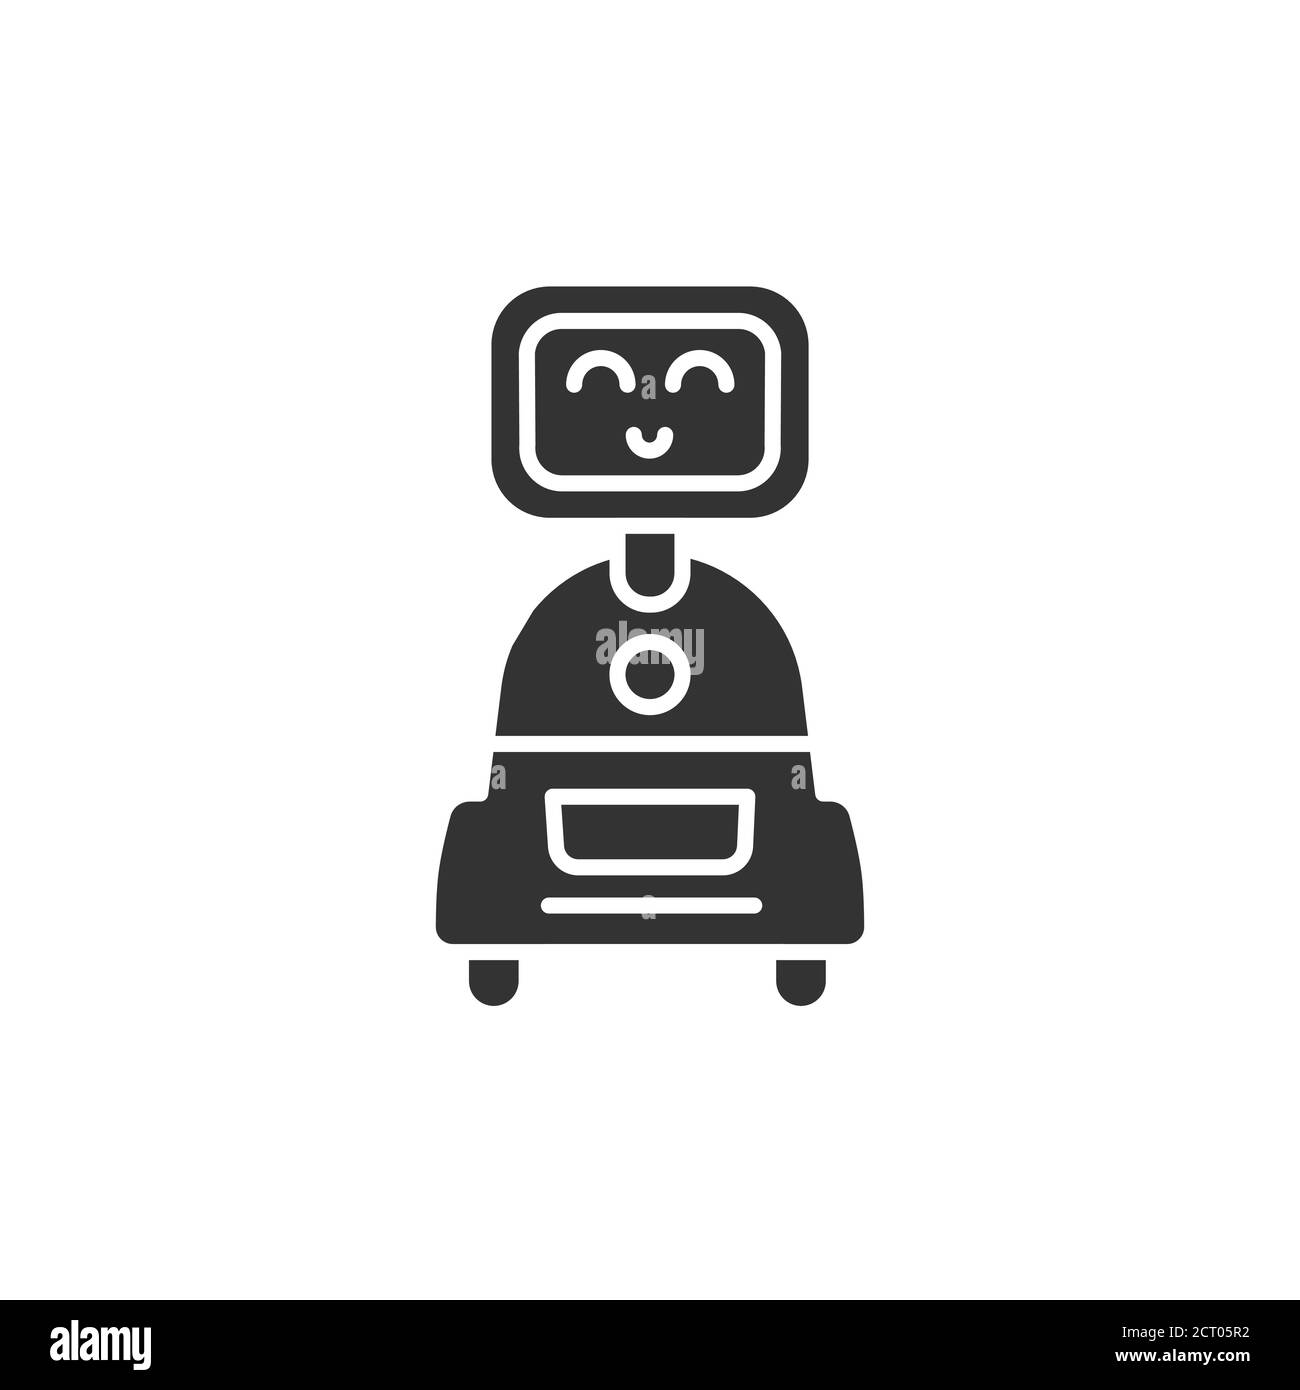 Personal robot black glyph icon. Cute smiling robot. Innovation in technology. Sign for web page, app. UI UX GUI design element. Editable stroke. Stock Vector